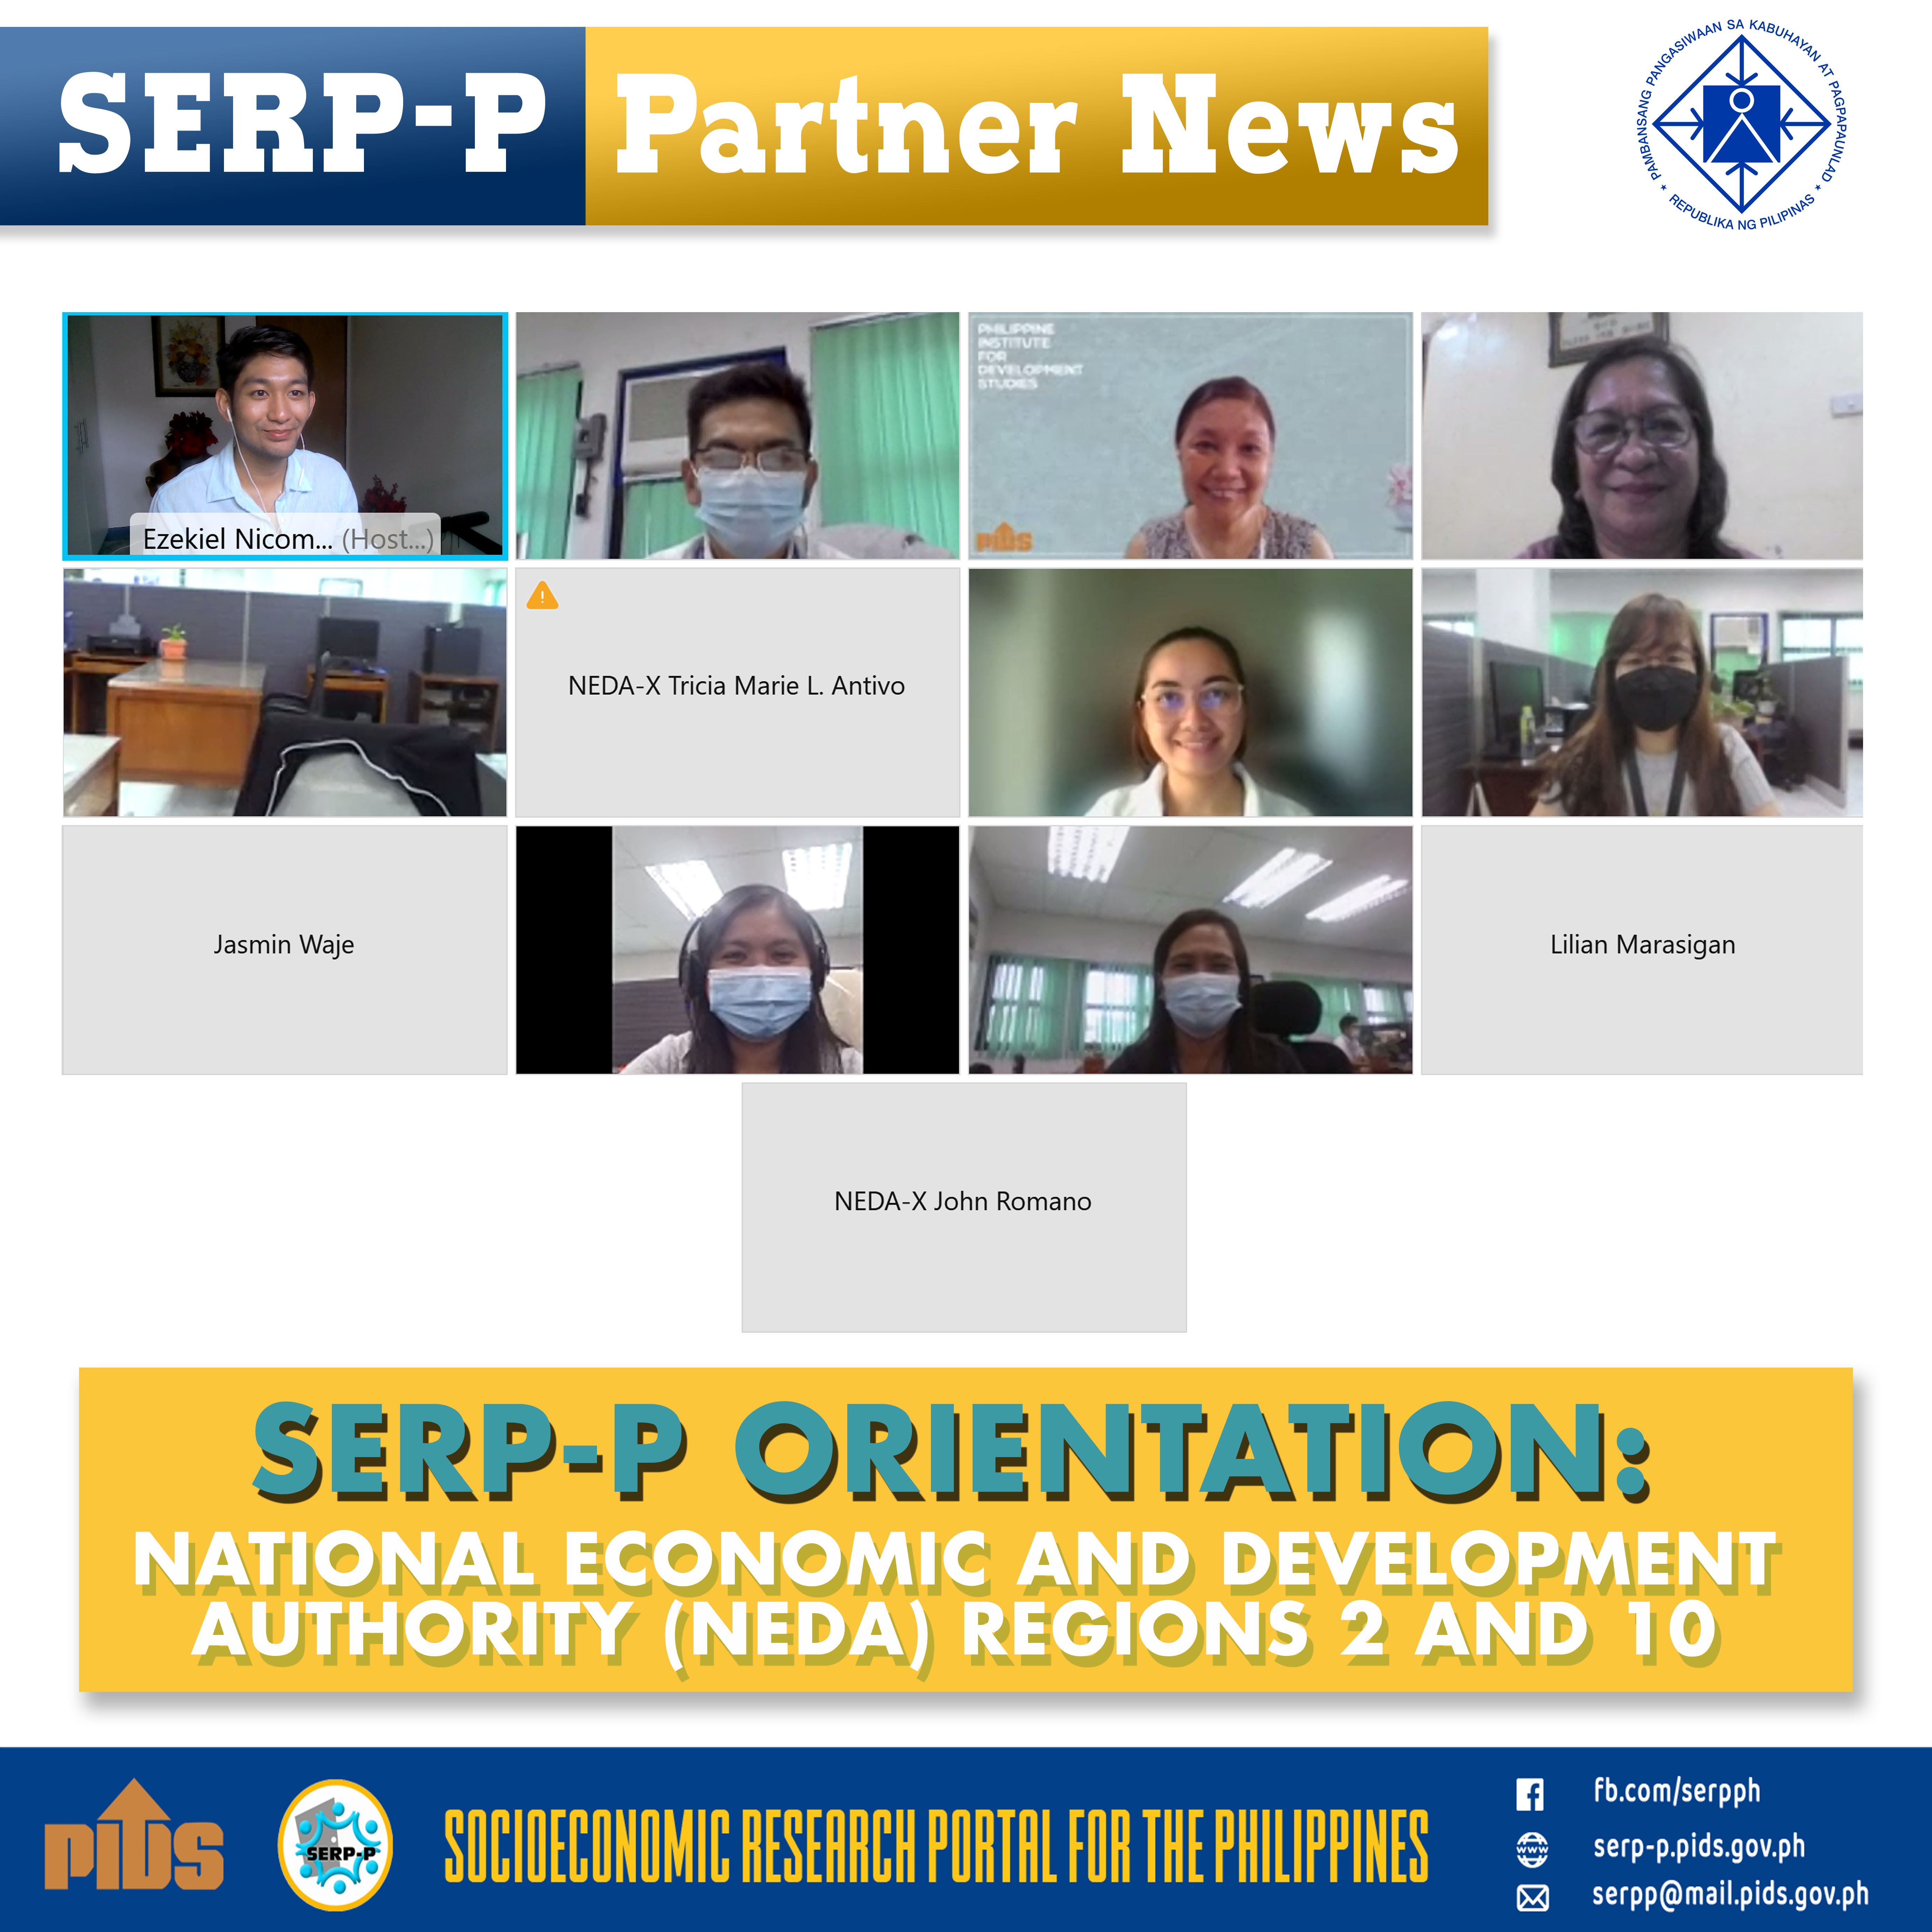 SERP-P Orientation with National Economic and Development Authority (NEDA) Regions 2 and 10-serp-p partner news.jpg